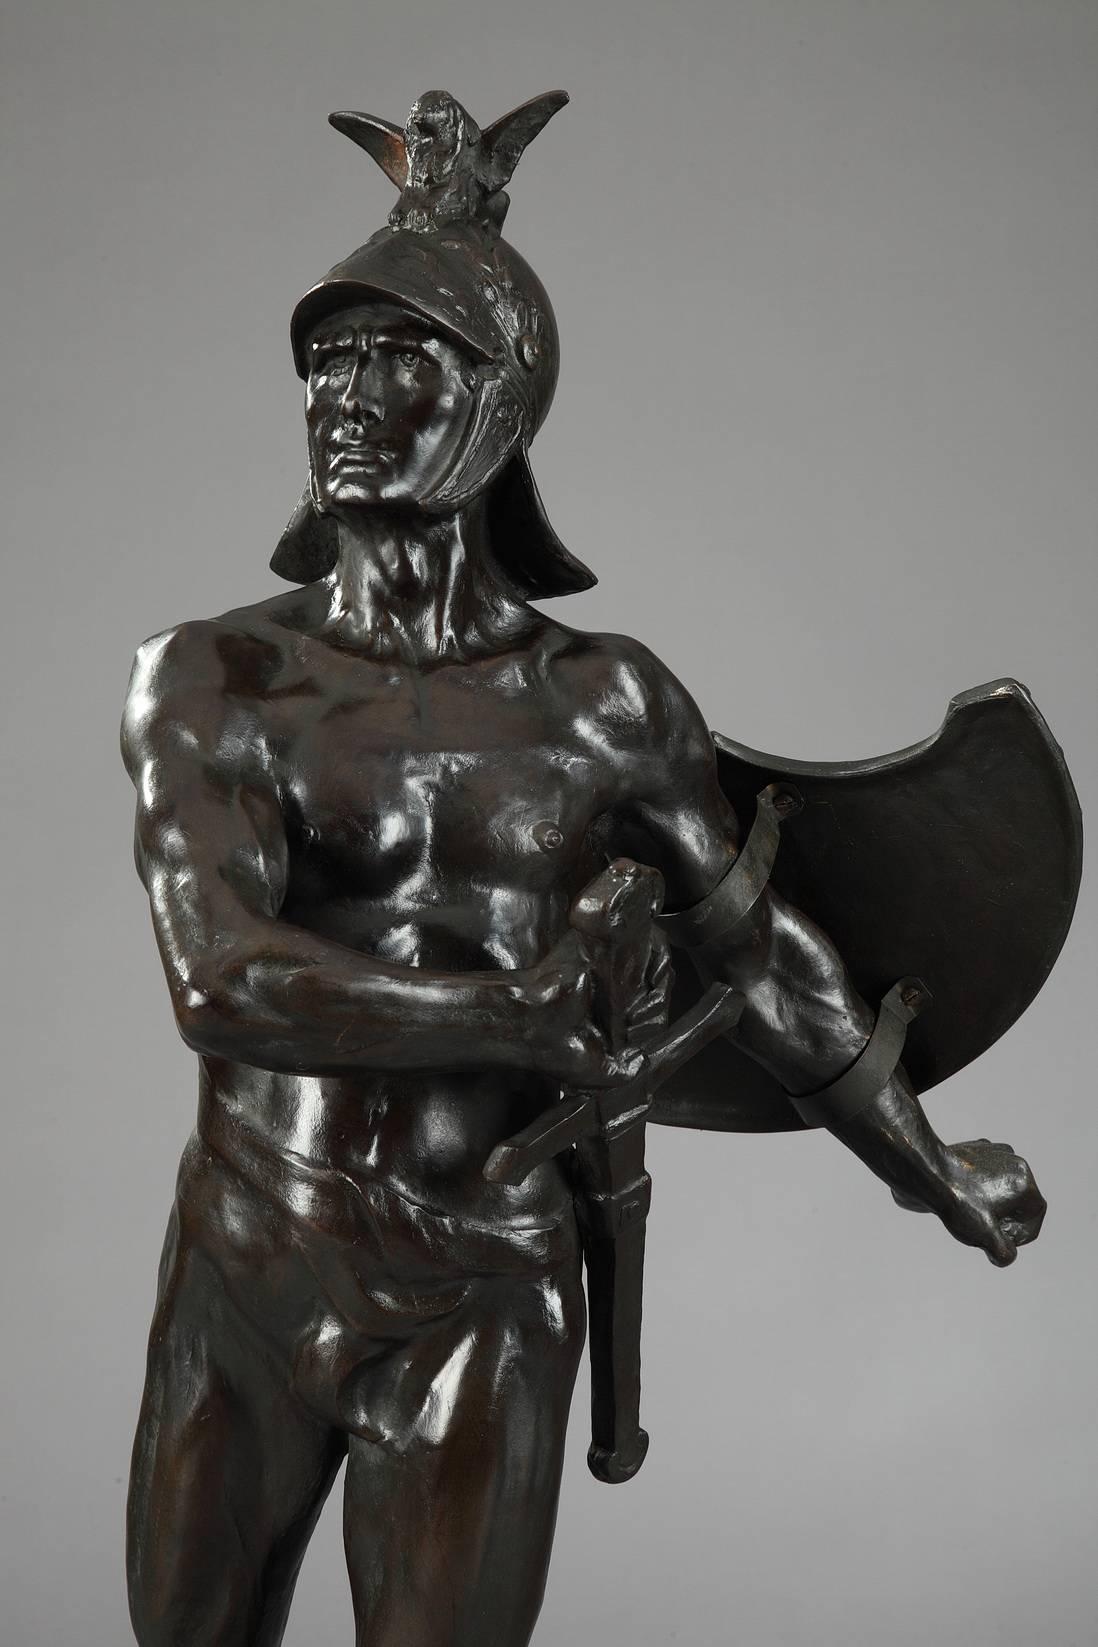 Large patinated bronze figure of an Antiquity warrior. He is set on a base decorated with battle scenes, marked: Les Chasseurs Éclaireurs de Bruxelles à leur Lt Colonel O. Tahon 1870-1910 (The Hunters Scouts from Brussels to their Lt Colonel O.